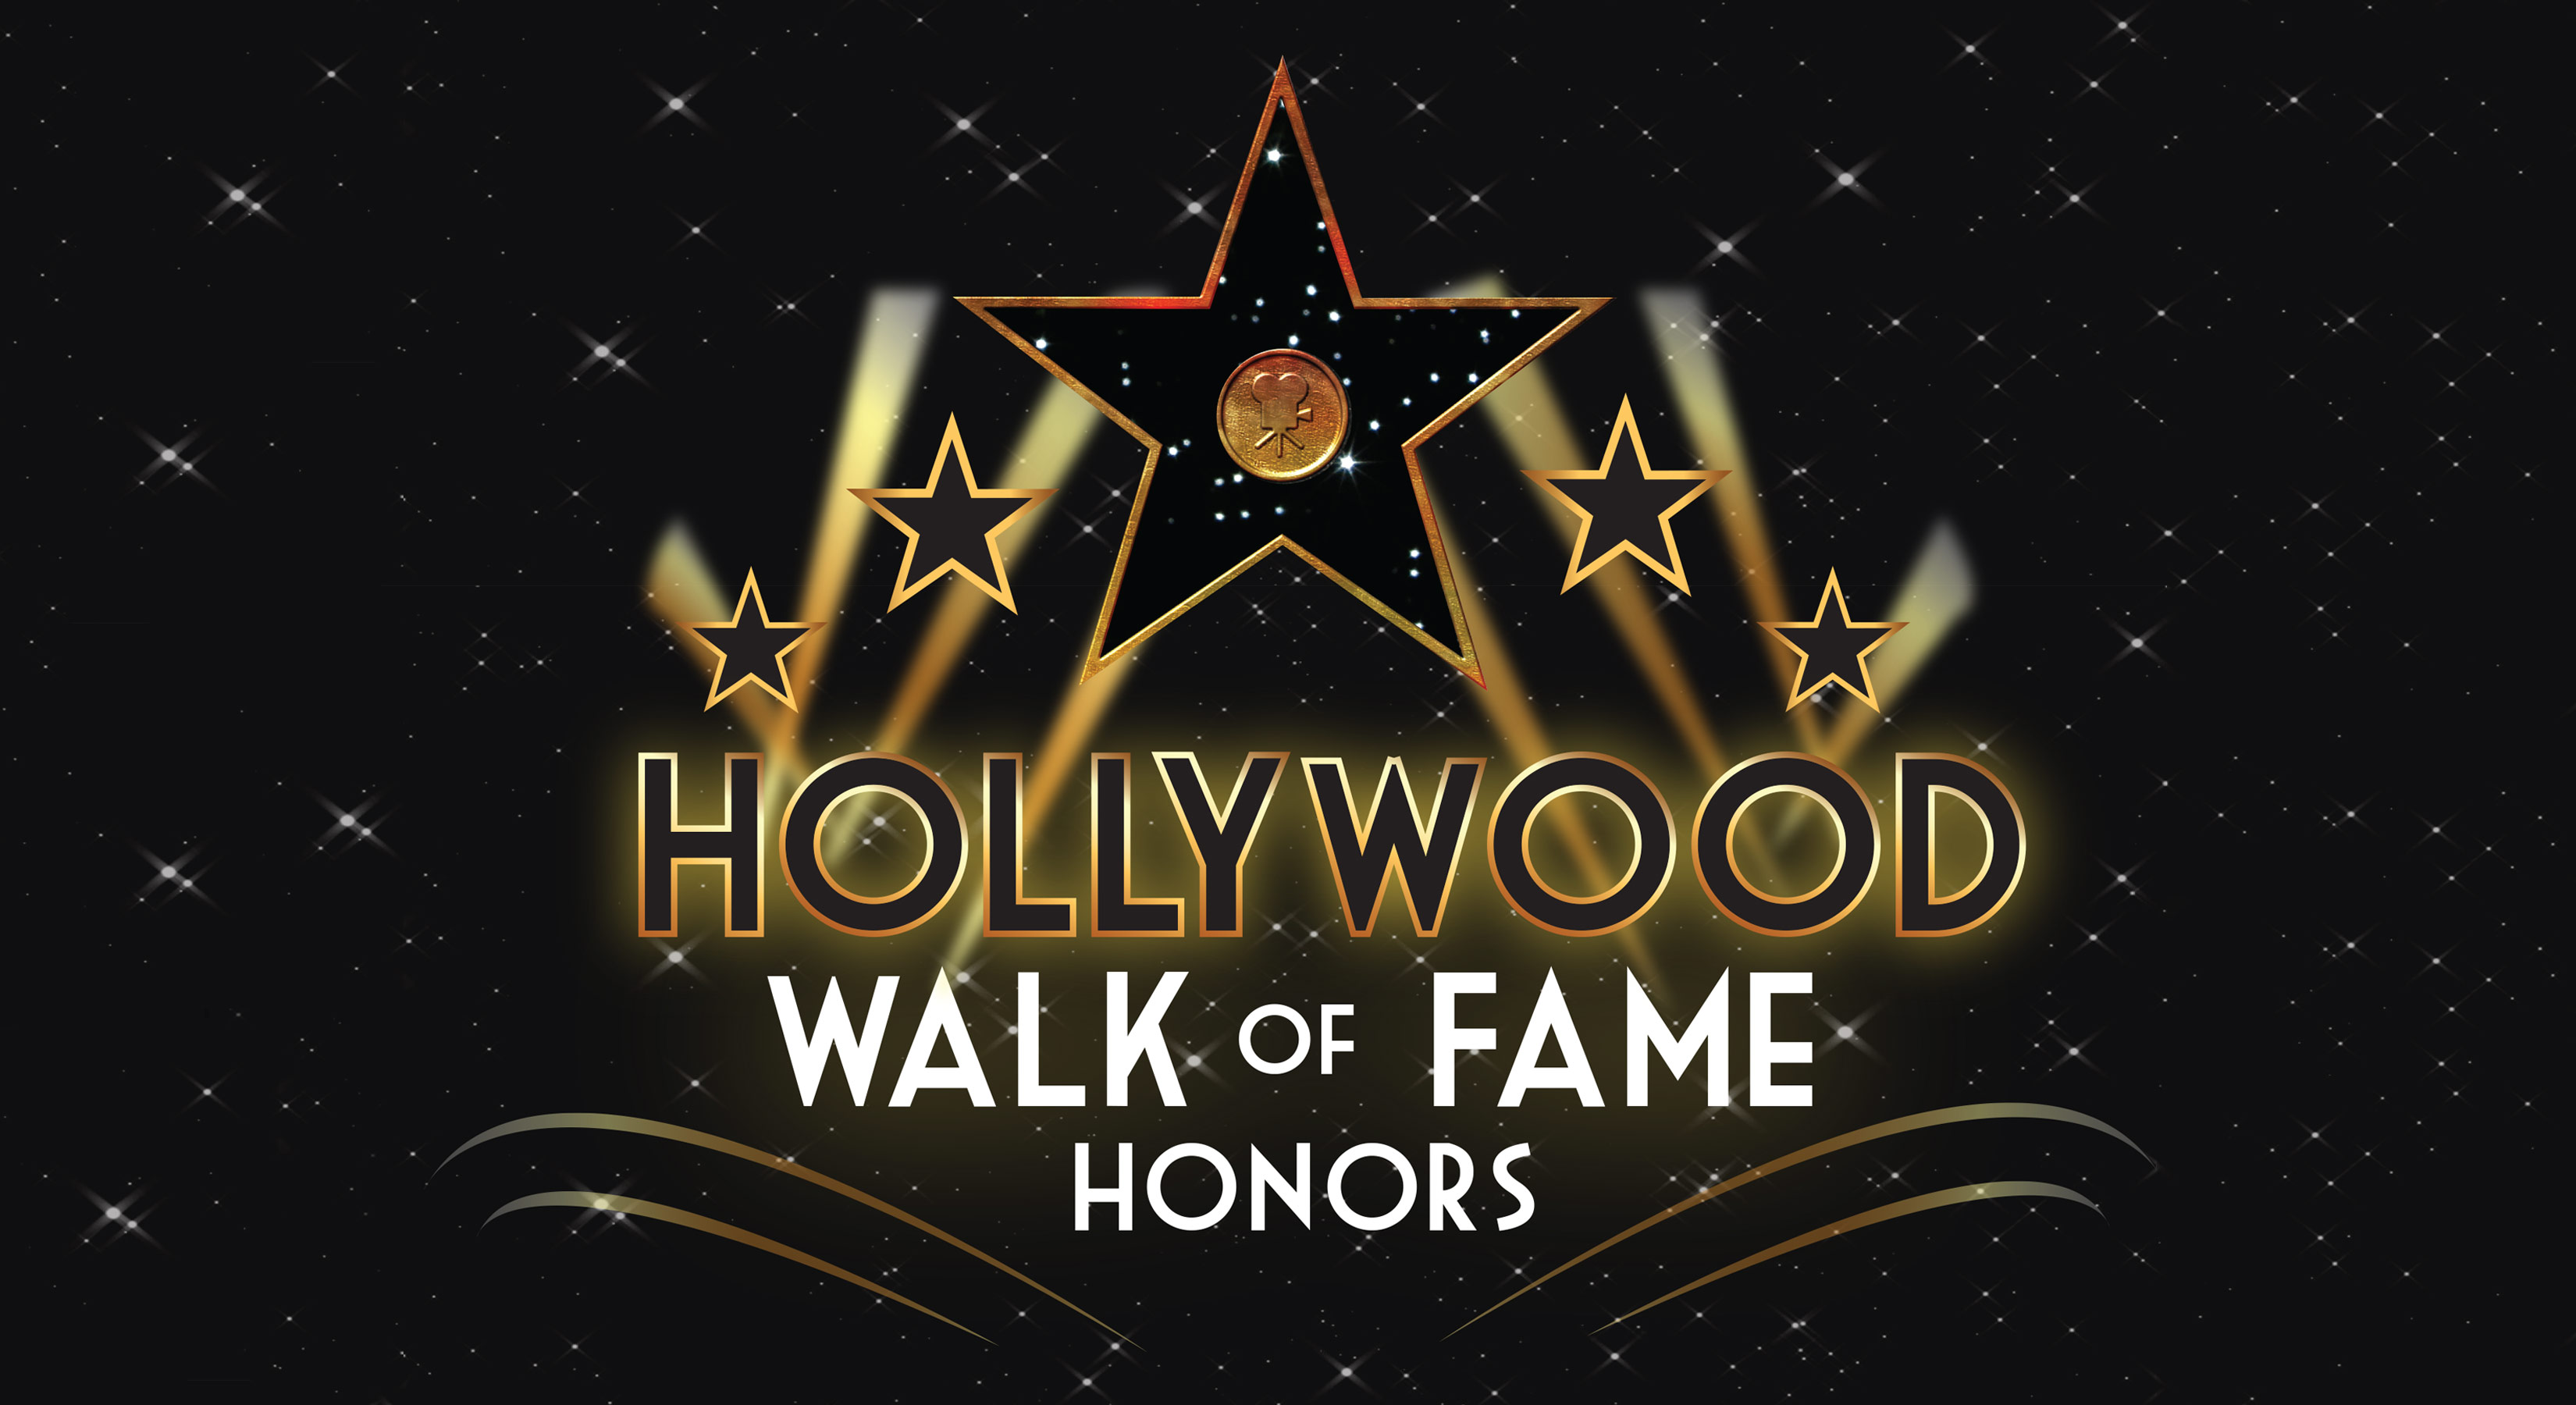 Walk of Fame Honors